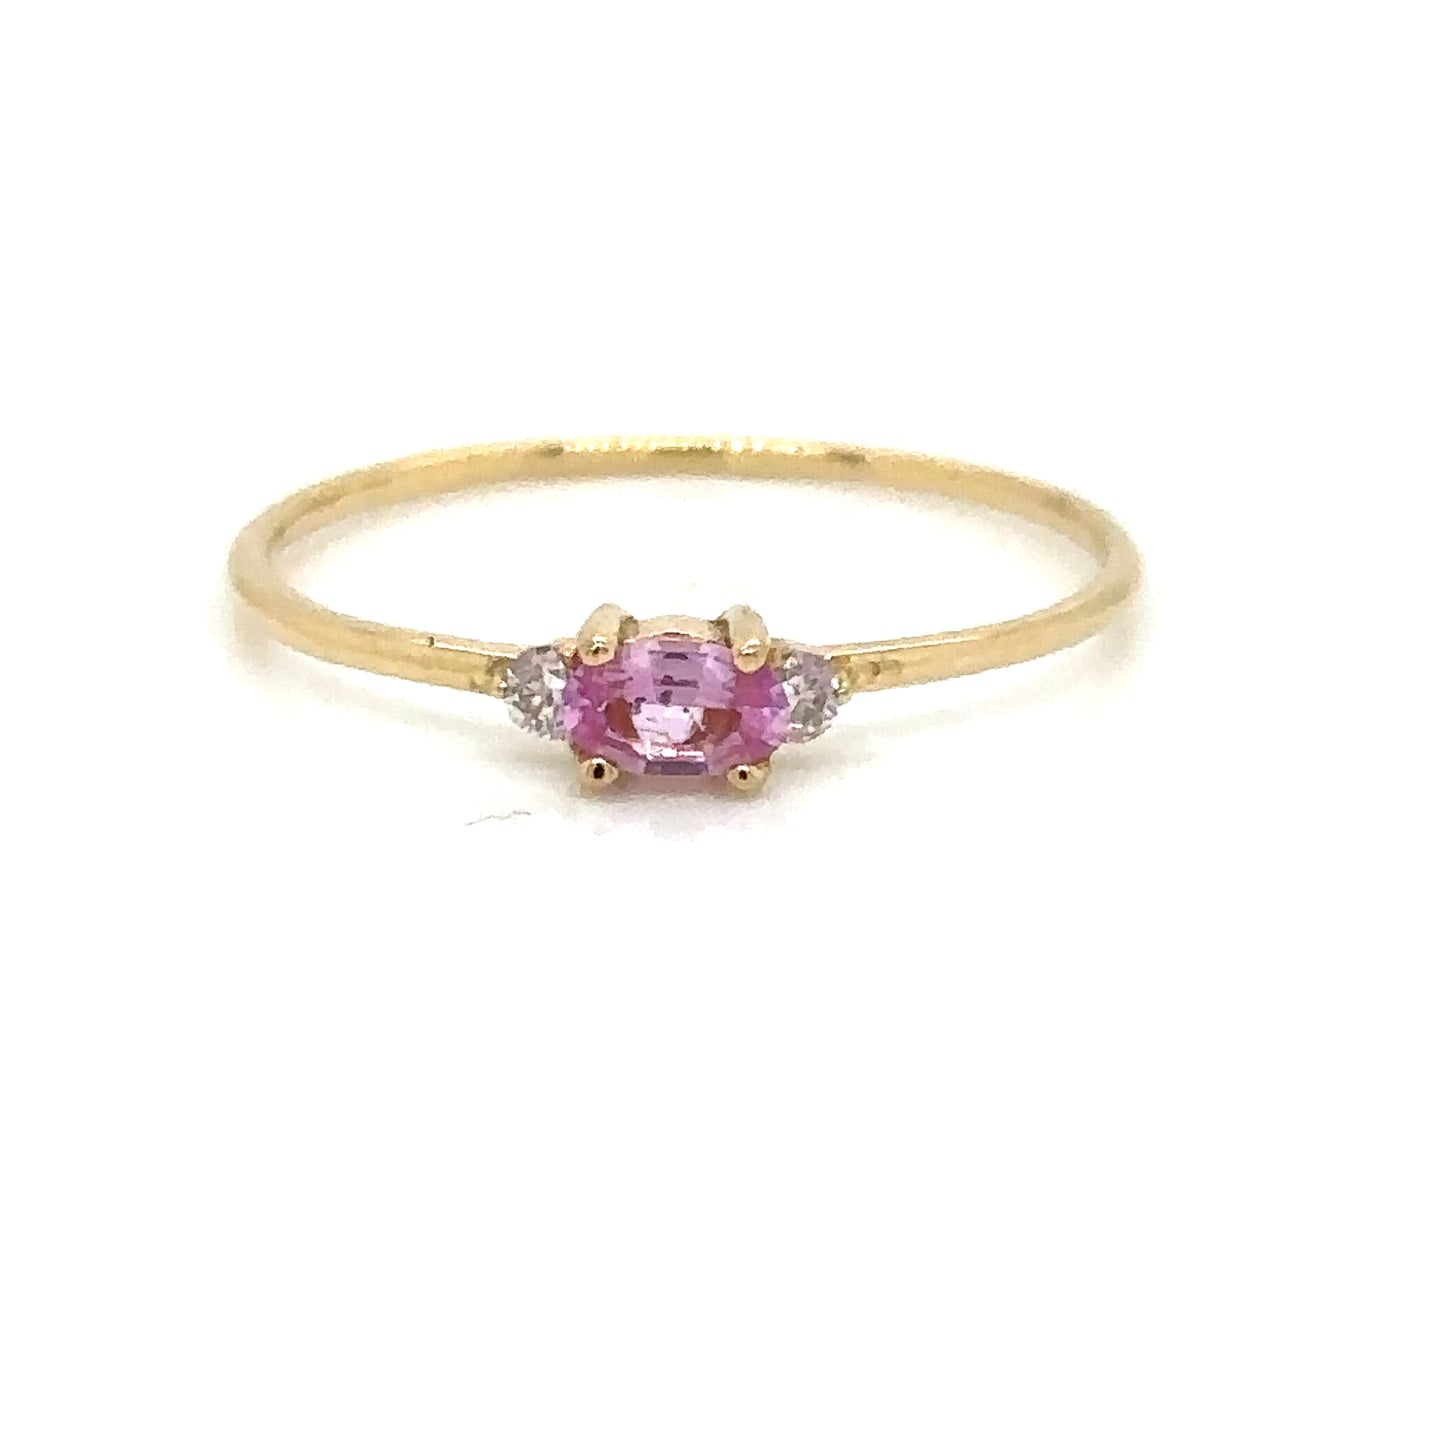 IMMEDIATE DELIVERY / UNIQUE PIECE / Pink Sapphire Ring with Diamonds / 14k Yellow Gold / Size 9